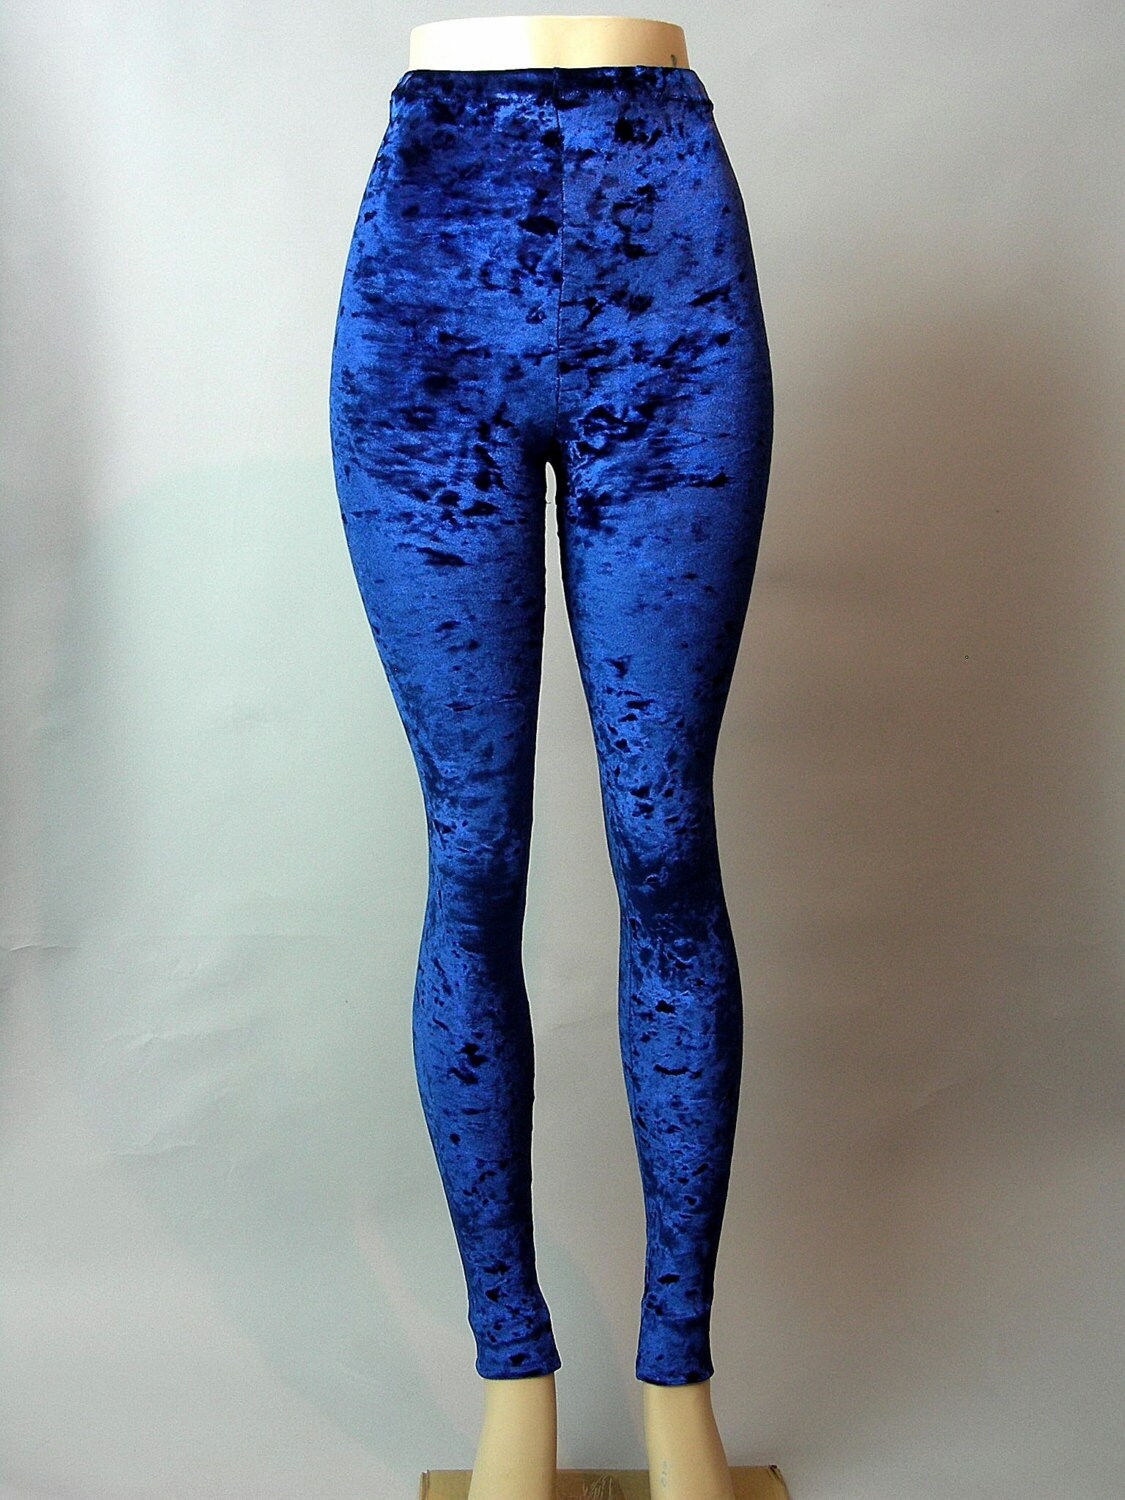 solid royal blue crushed velvet tights by timothytightbottoms